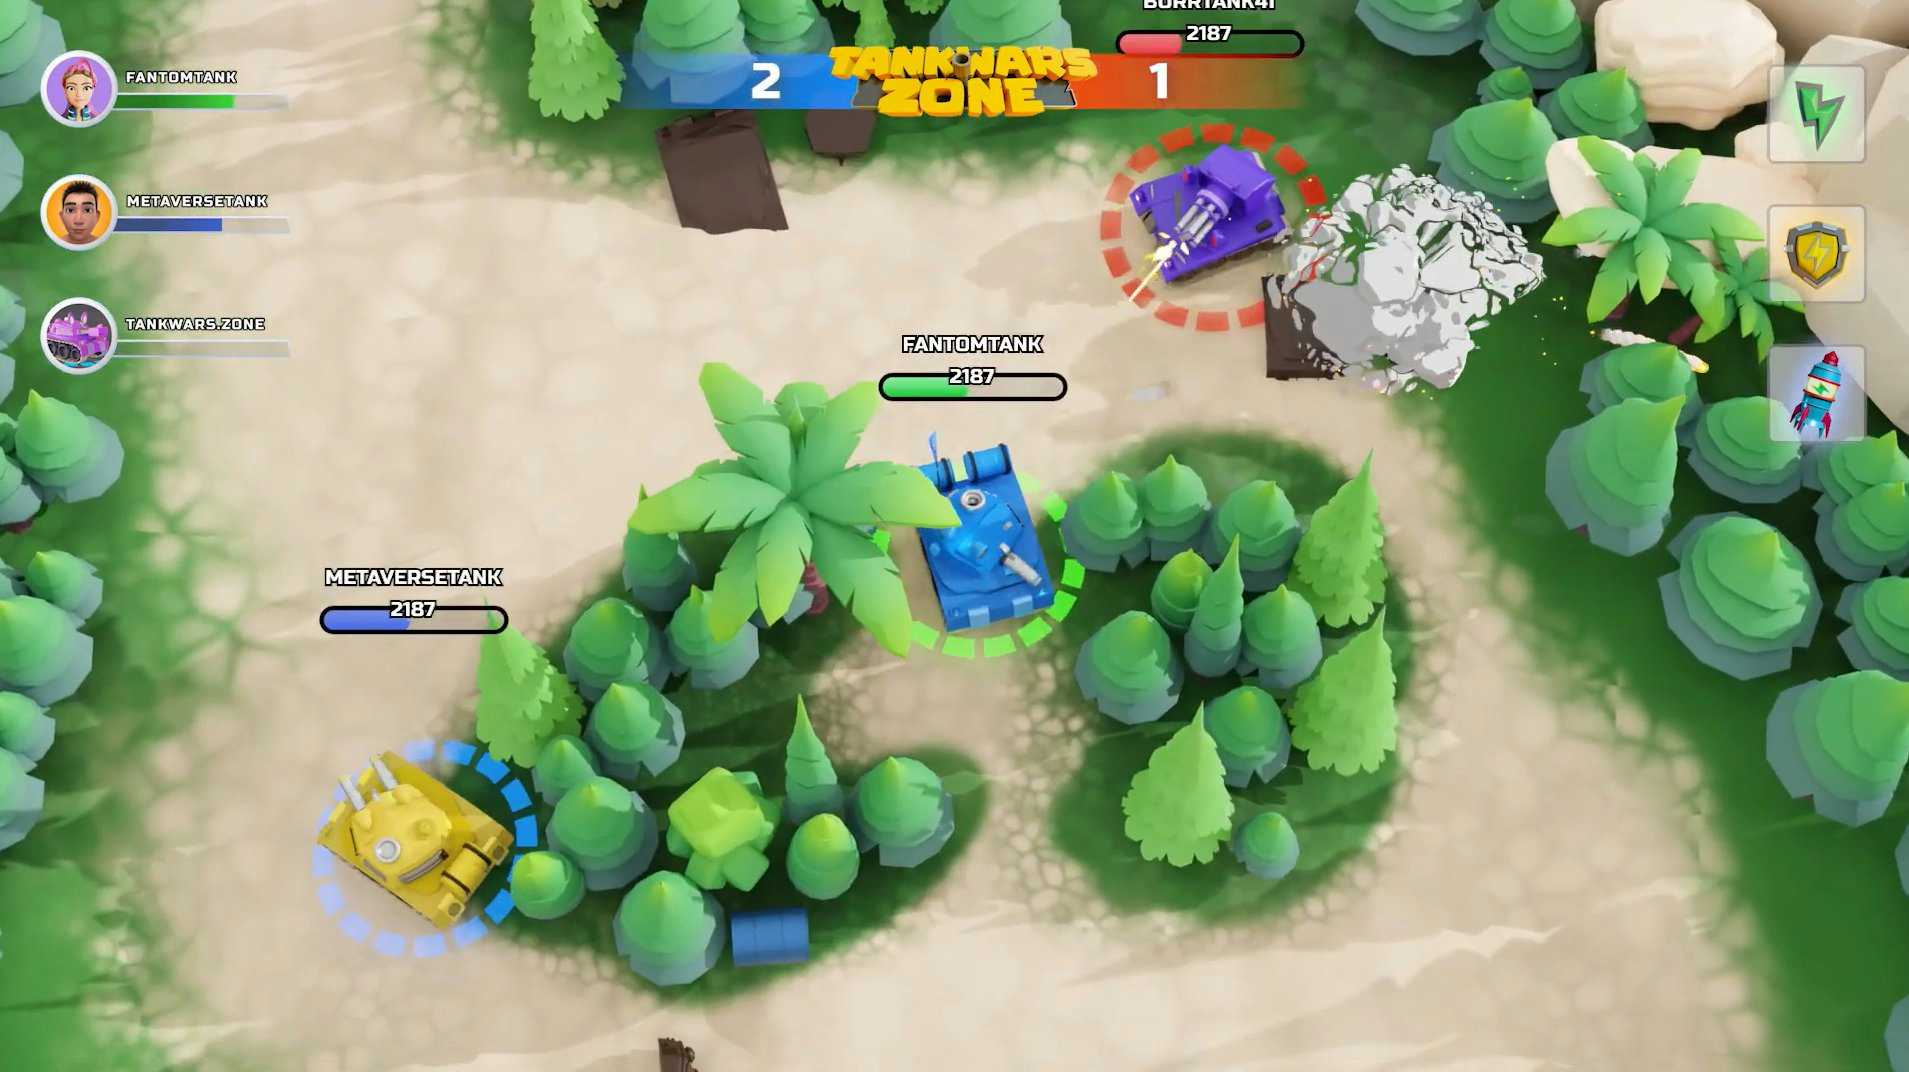 game image from Tank Wars Zone